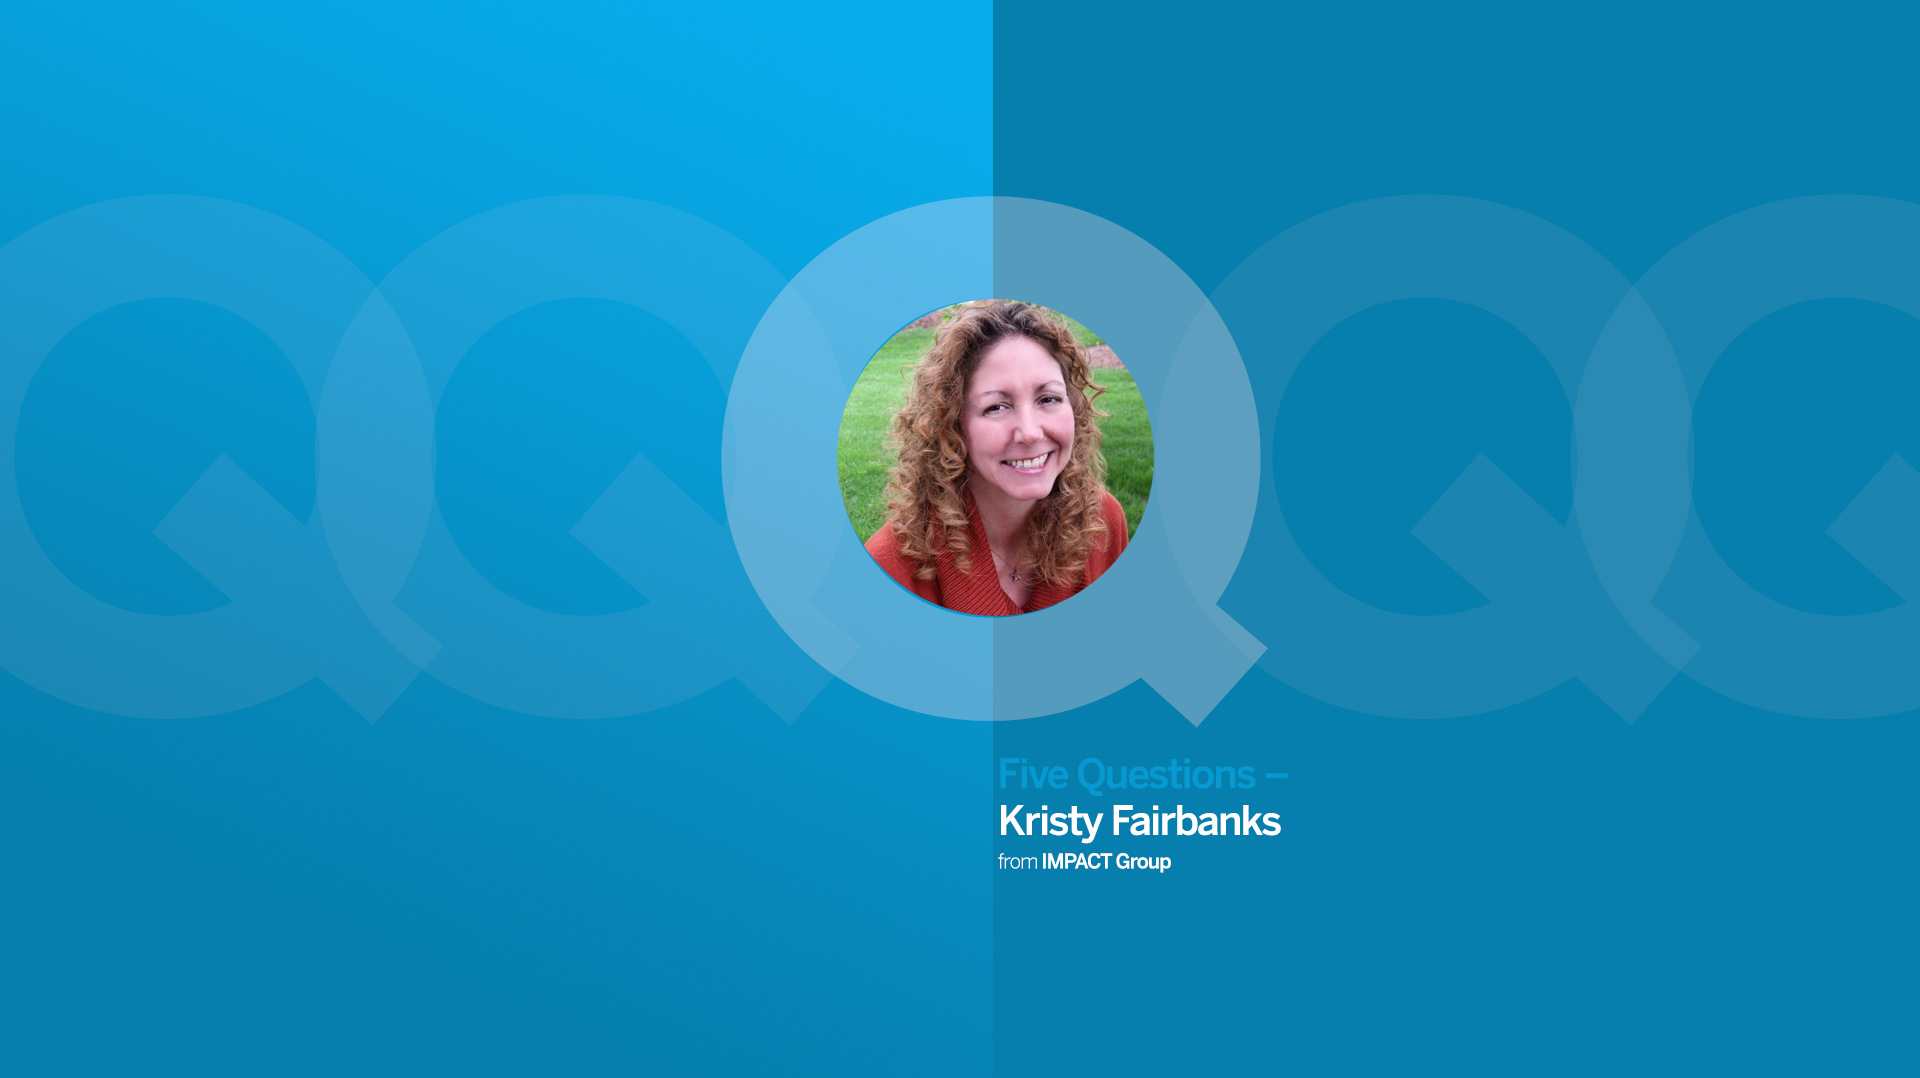 Five Questions with Kristy Fairbanks